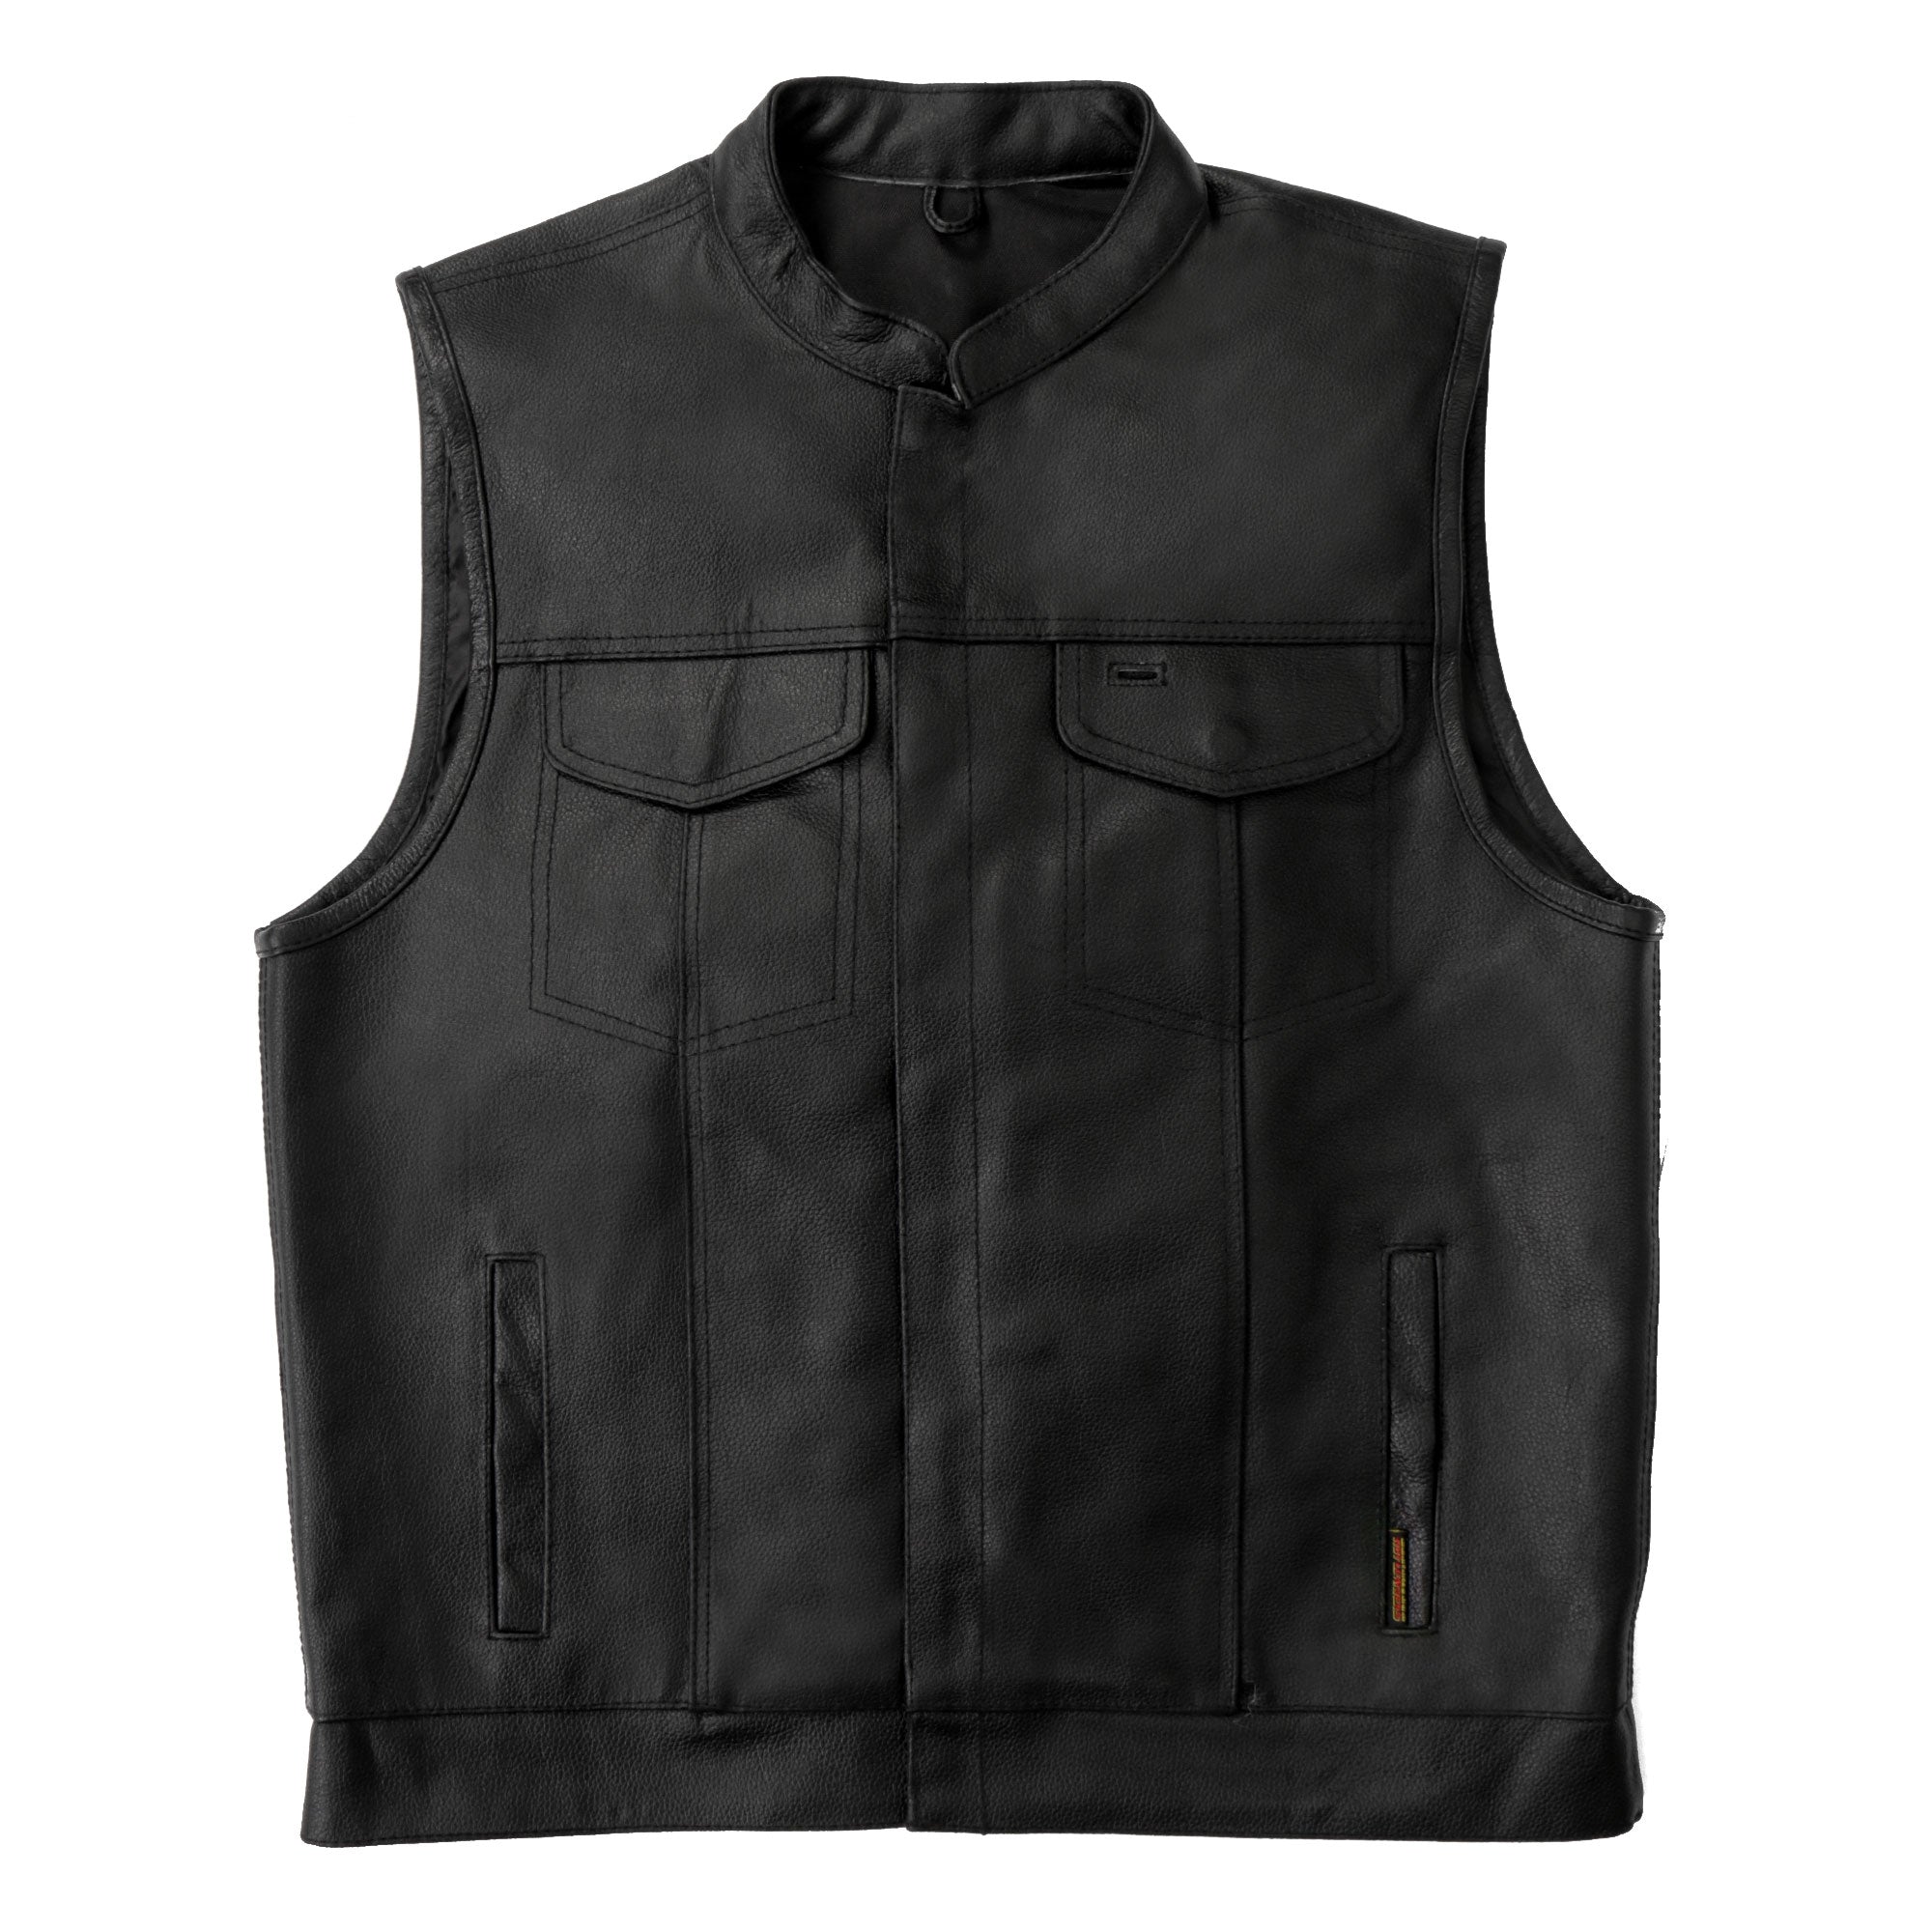 Hot Leathers VSM1039 Men's Black Motorcycle 'Conceal and Carry' Club Leather Biker Vest